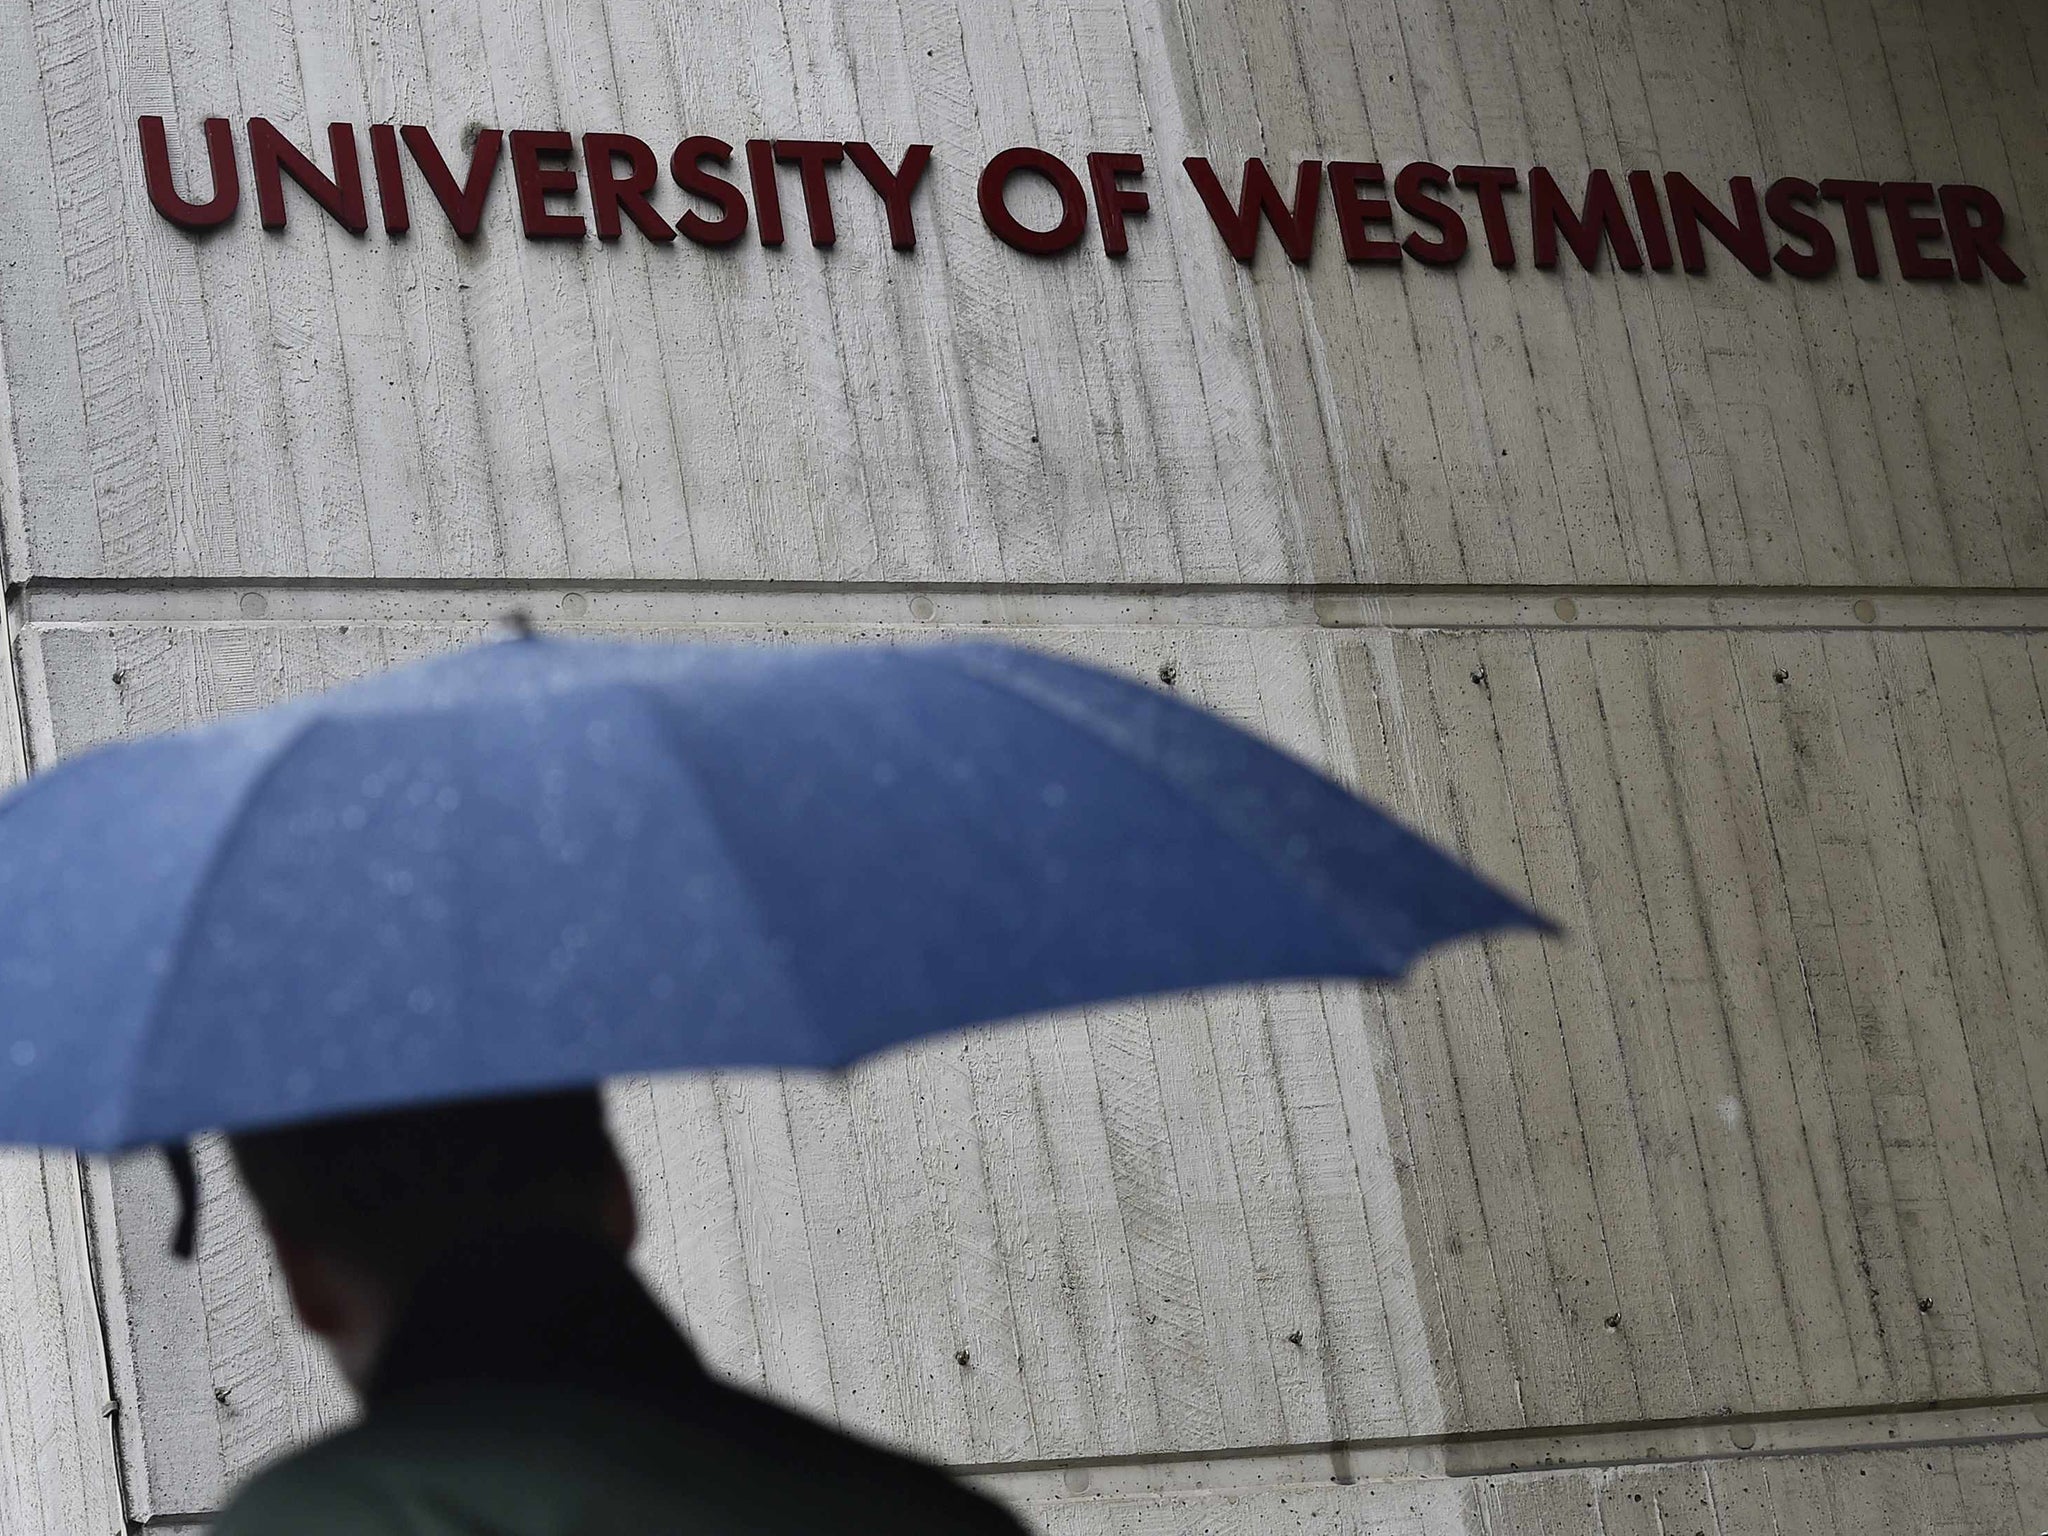 The University of Westminster, where he studied computer programming (Reuters)